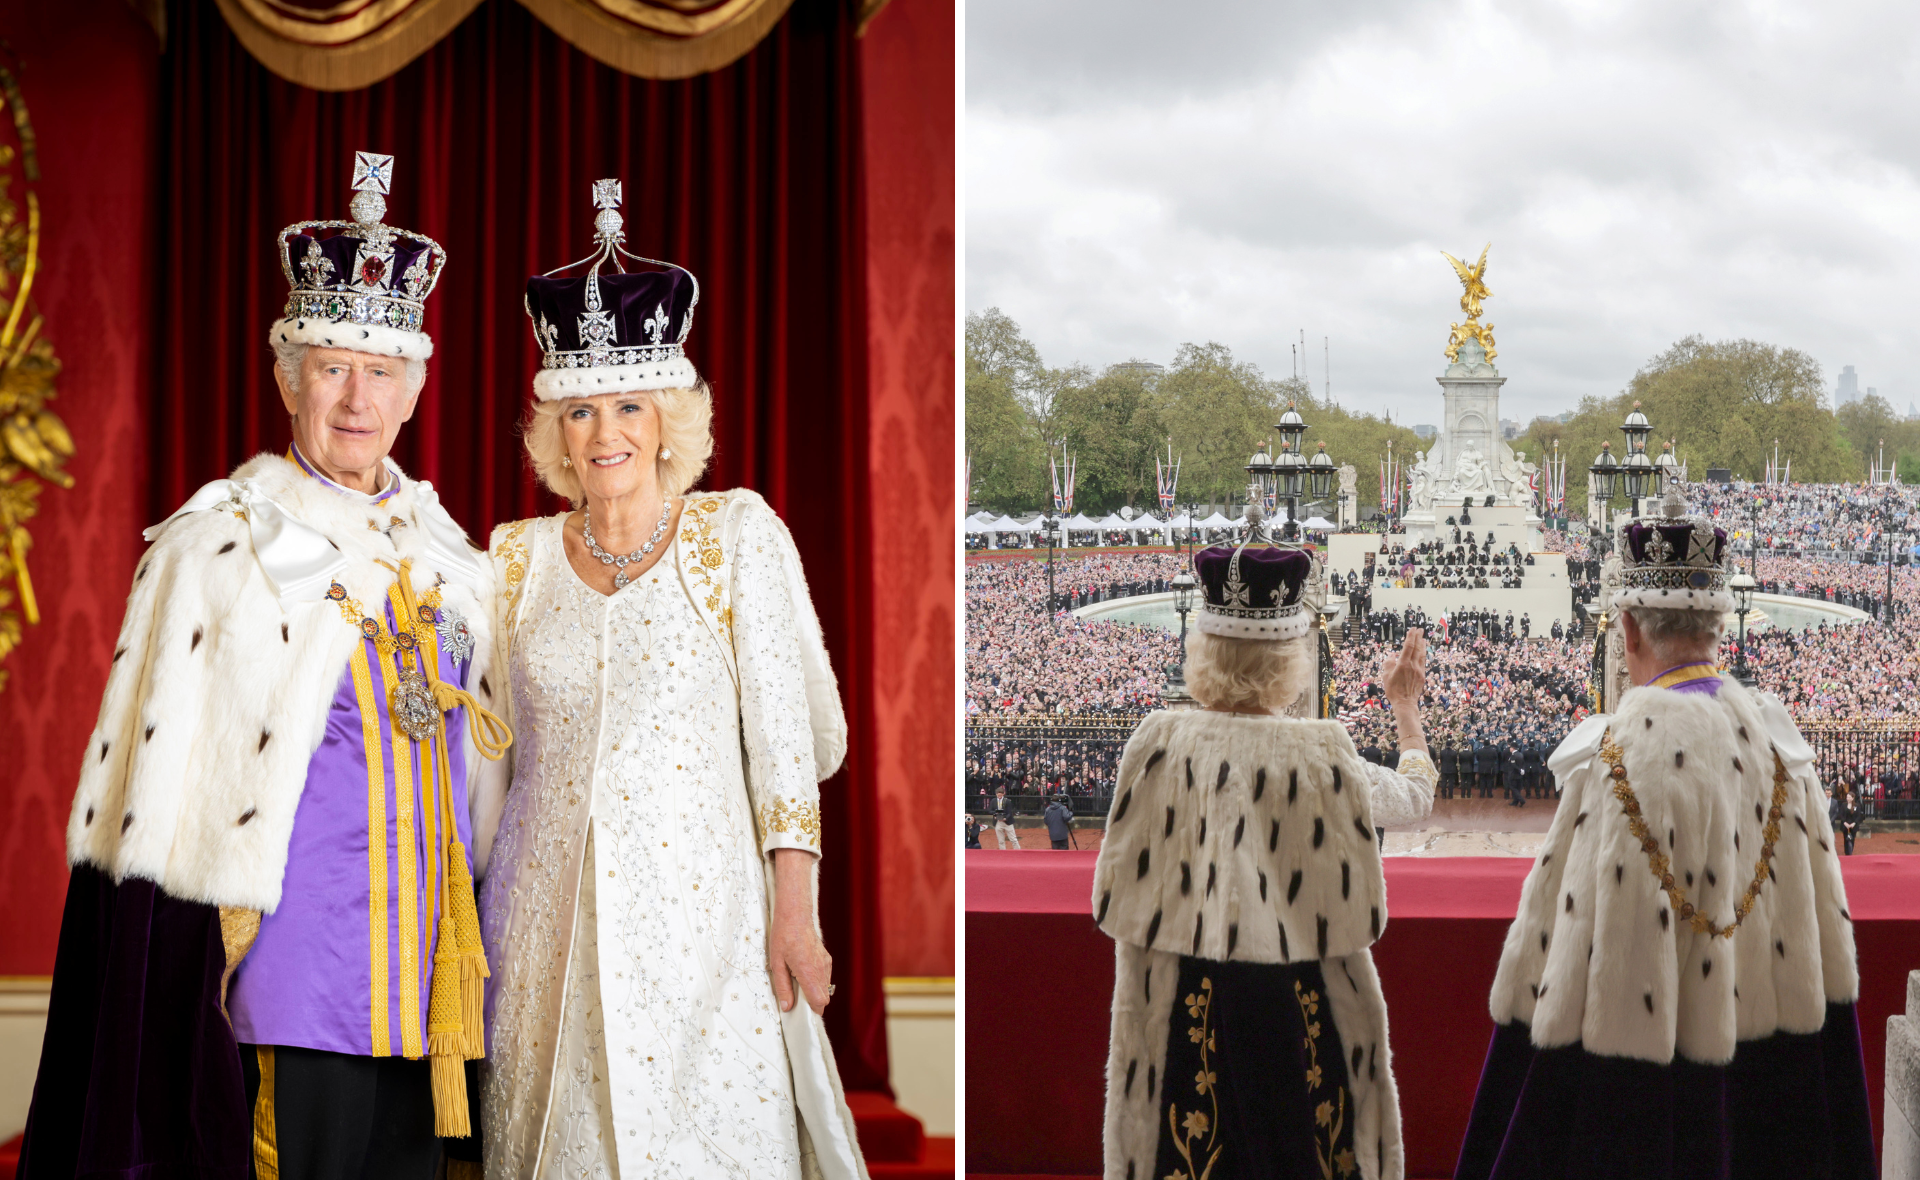 In Focus: The Coronation of King Charles III and Queen Camilla